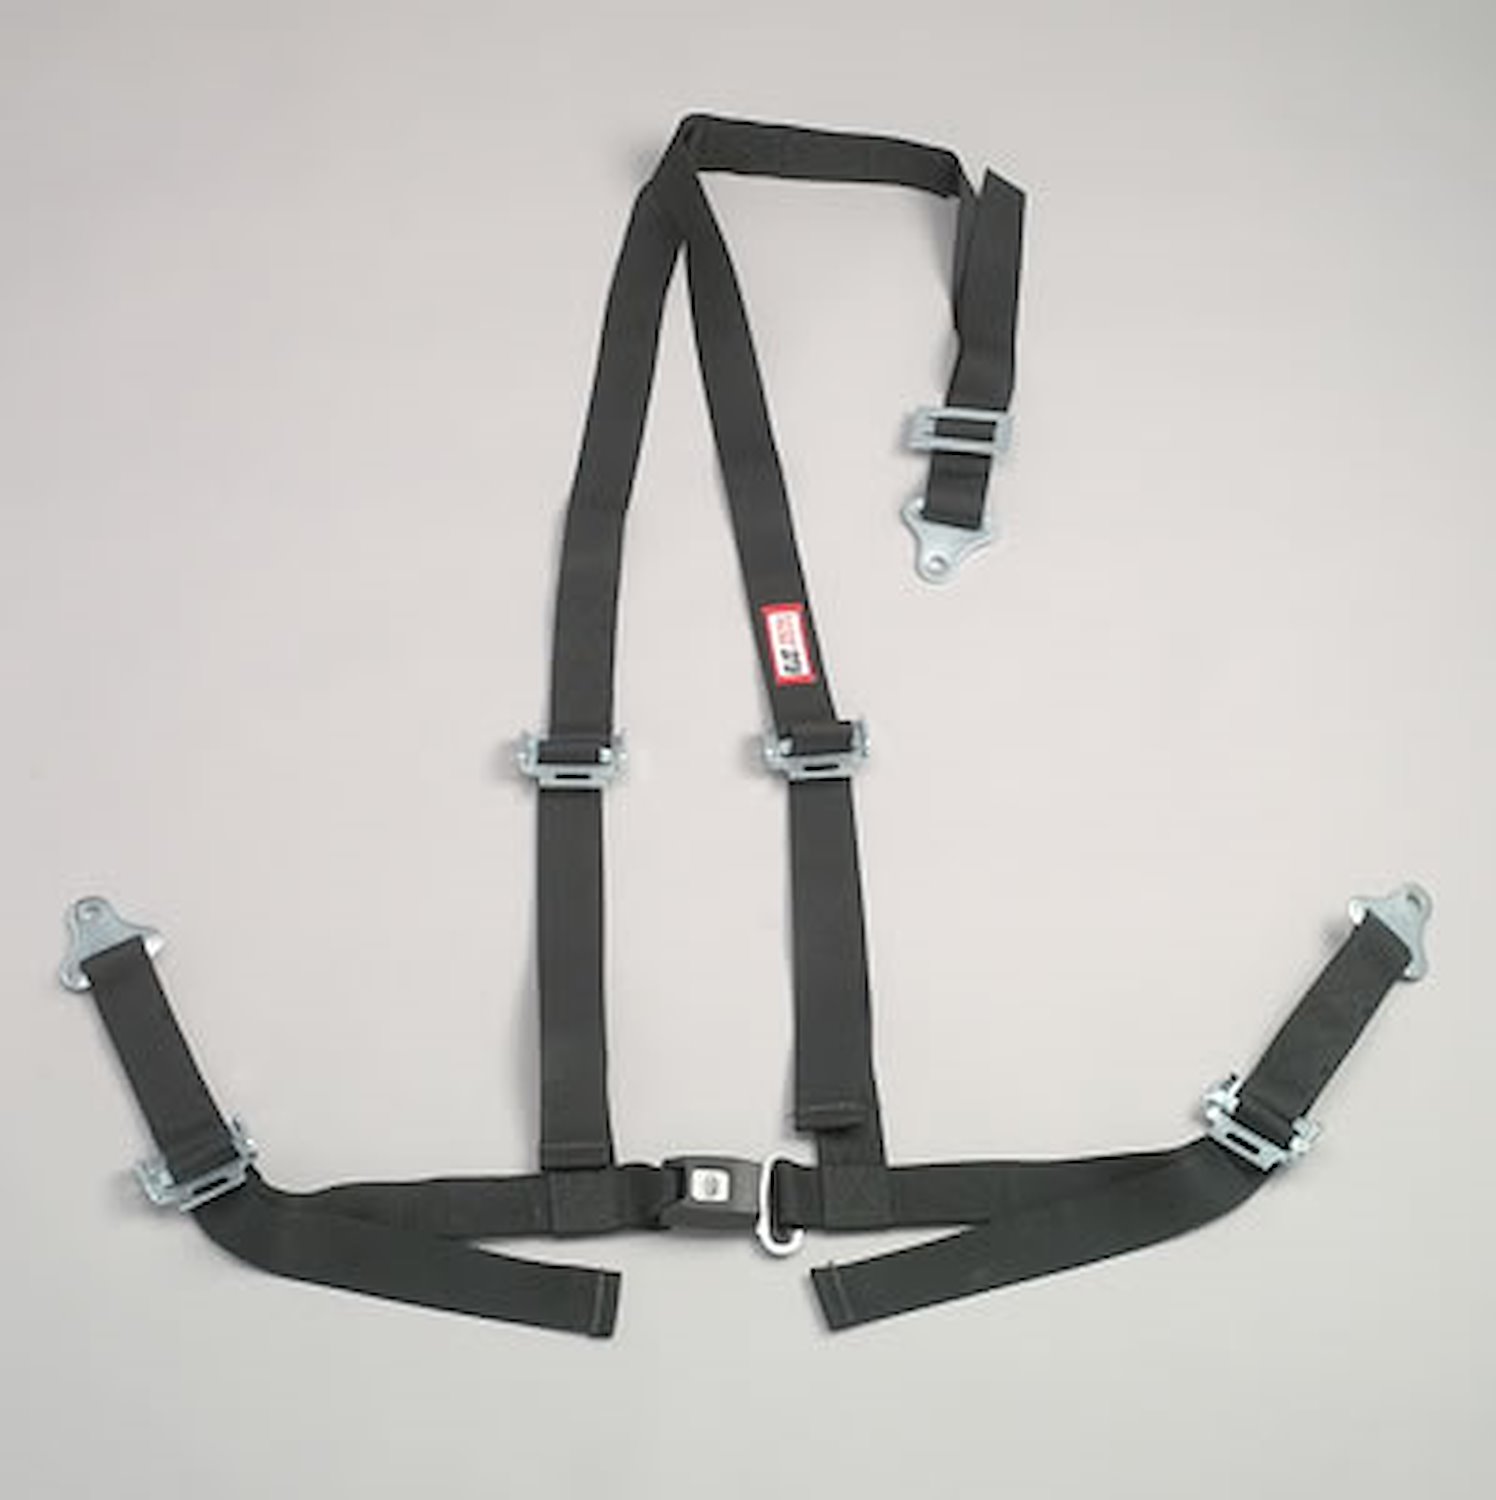 NON-SFI B&T HARNESS 2 PULL UP Lap Belt 2 S. H. V ROLL BAR Mount ALL BOLT ENDS w/STERNUM STRAP GRAY